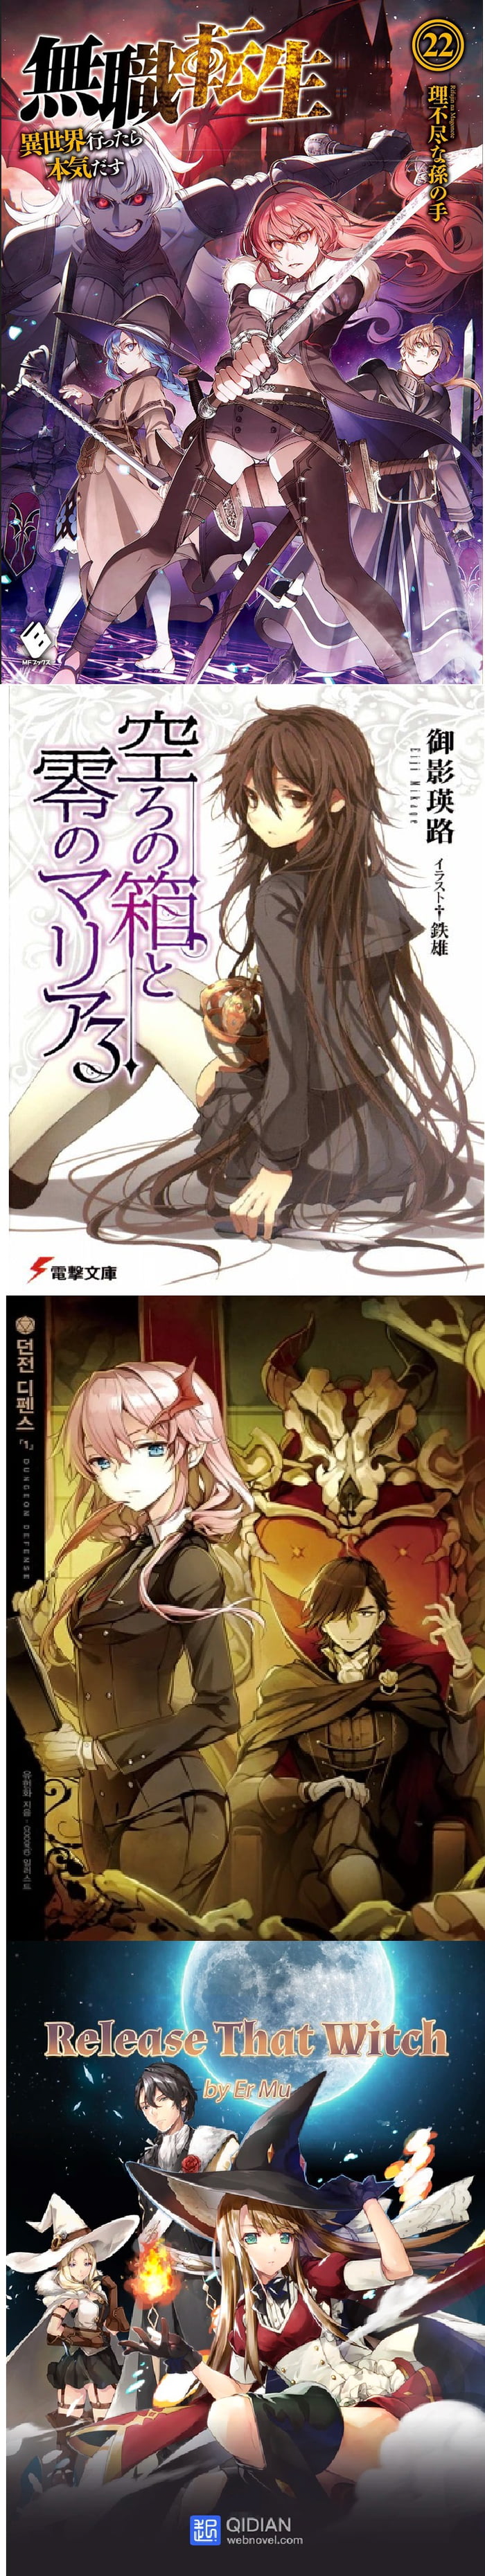 4 great but Lesser known LN/WN Recommendations (Mushoku Tensei, The Empty  Box and Zeroth Maria, Dungeon Defense, Release that Witch) - 9GAG